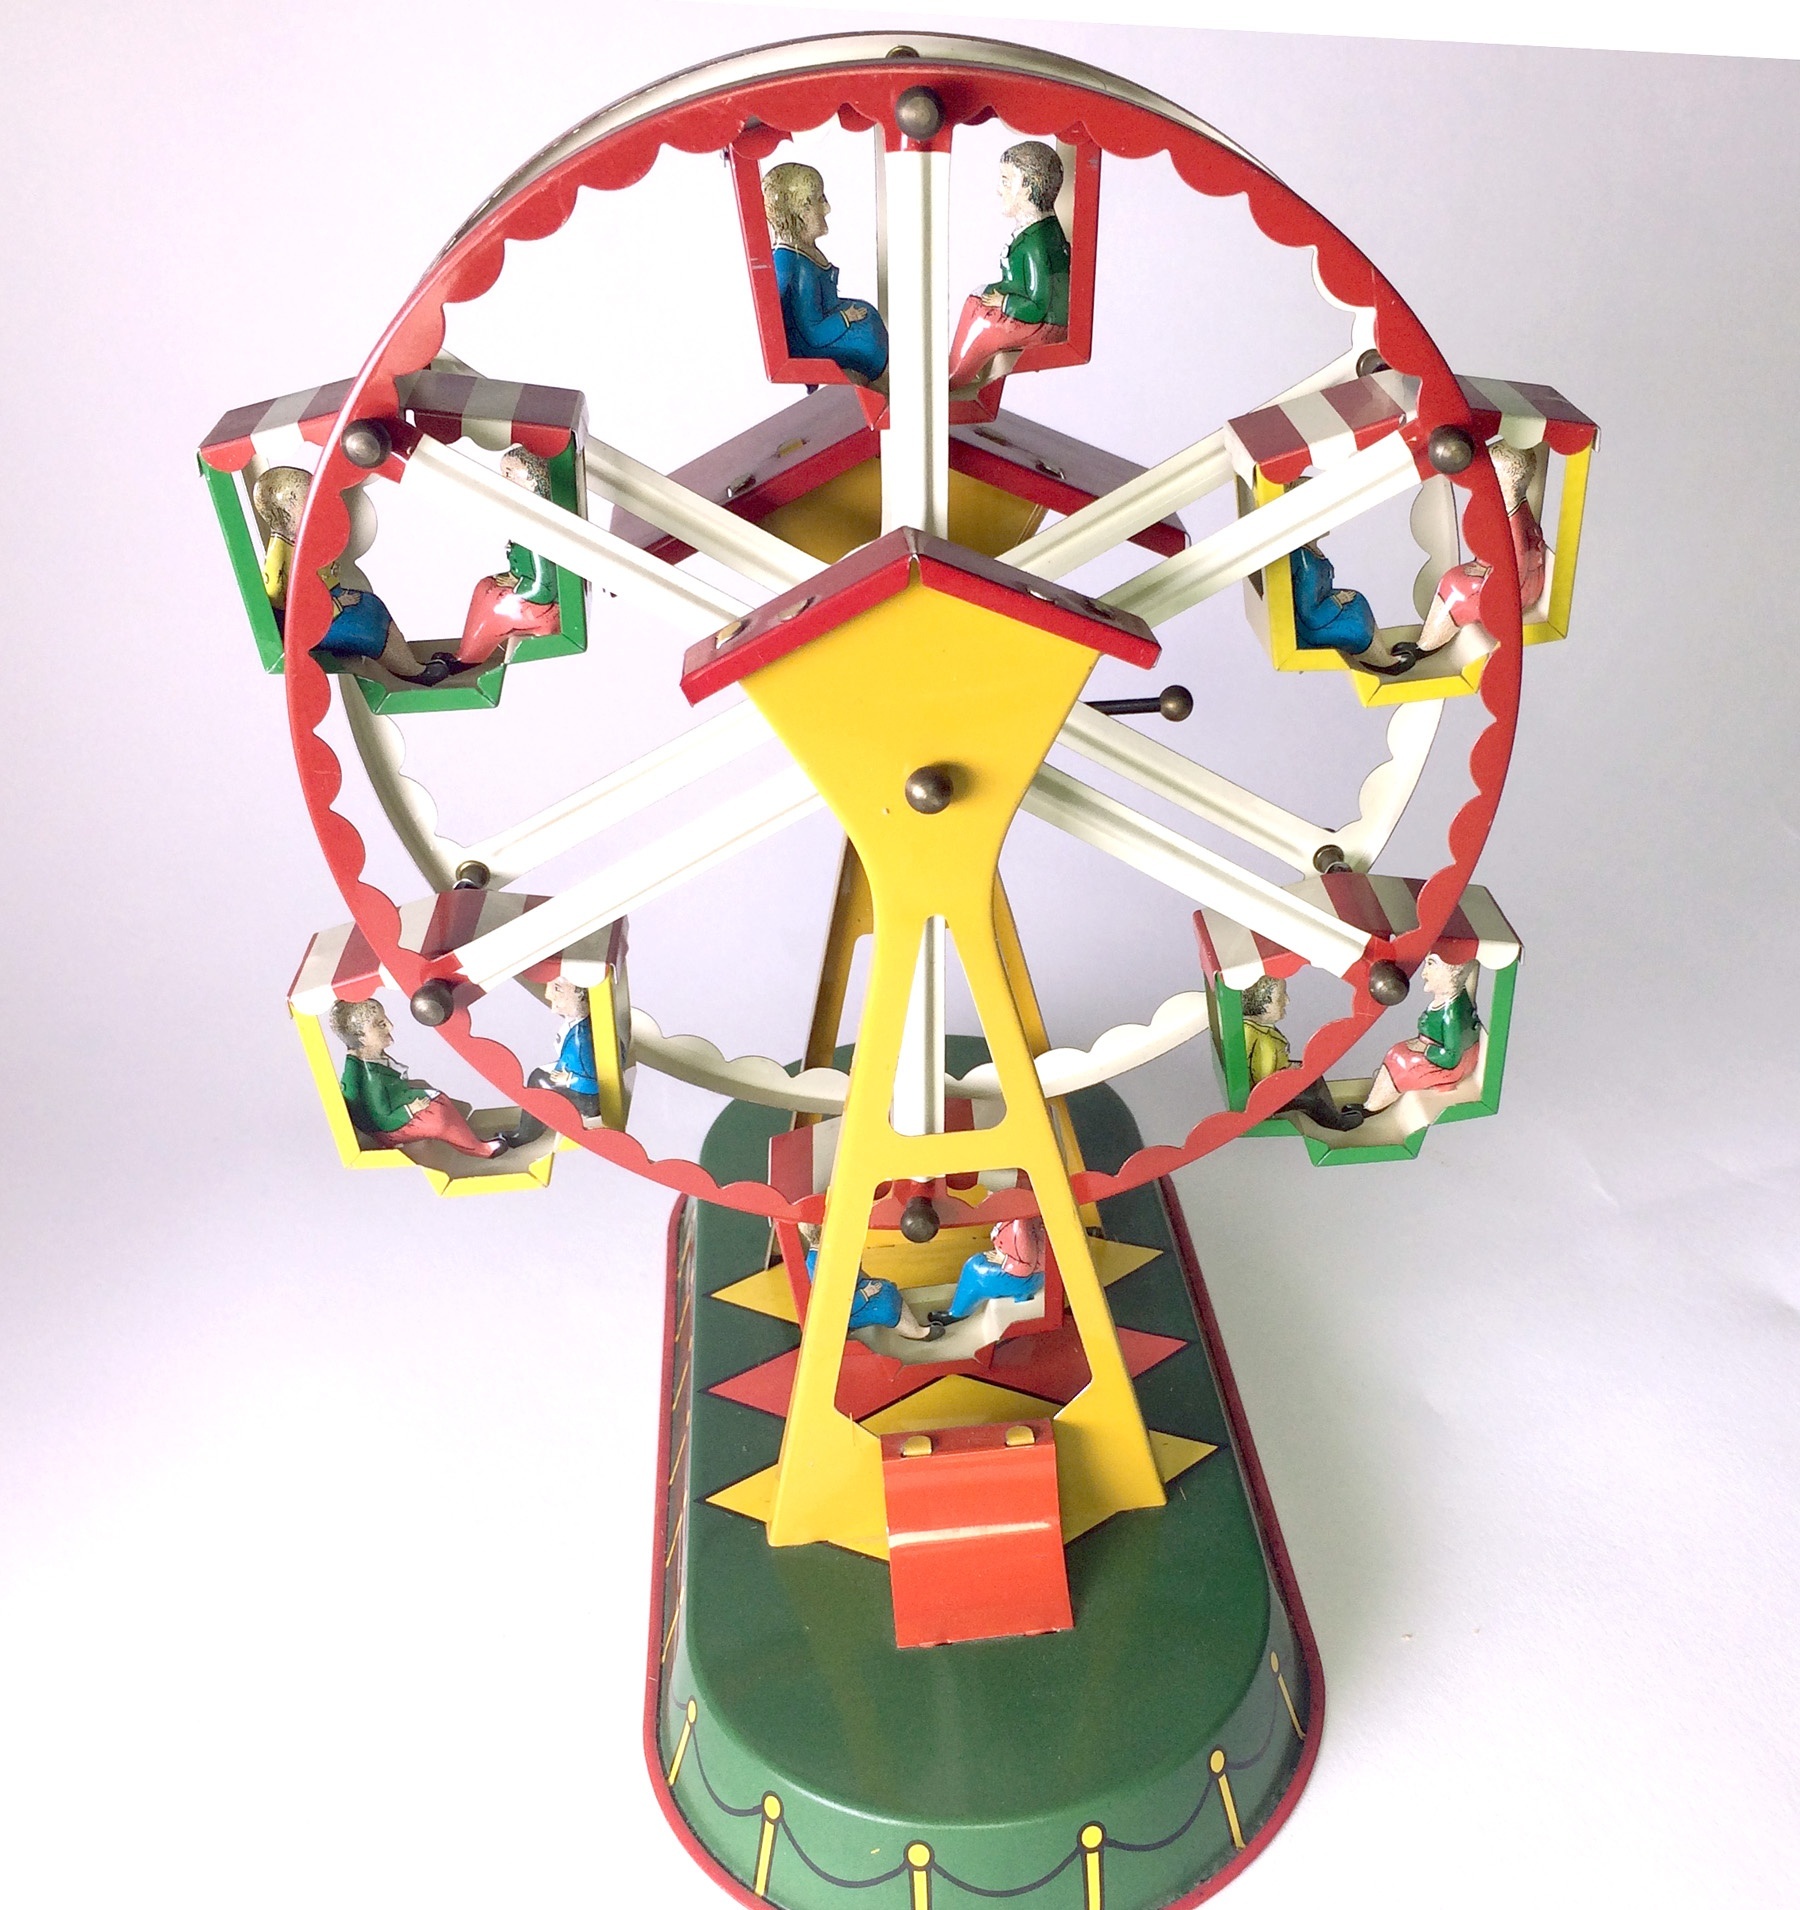 Details about   Joseph Wagner Ferris Wheel  Germany Vintage Repro Wind Up Toy 